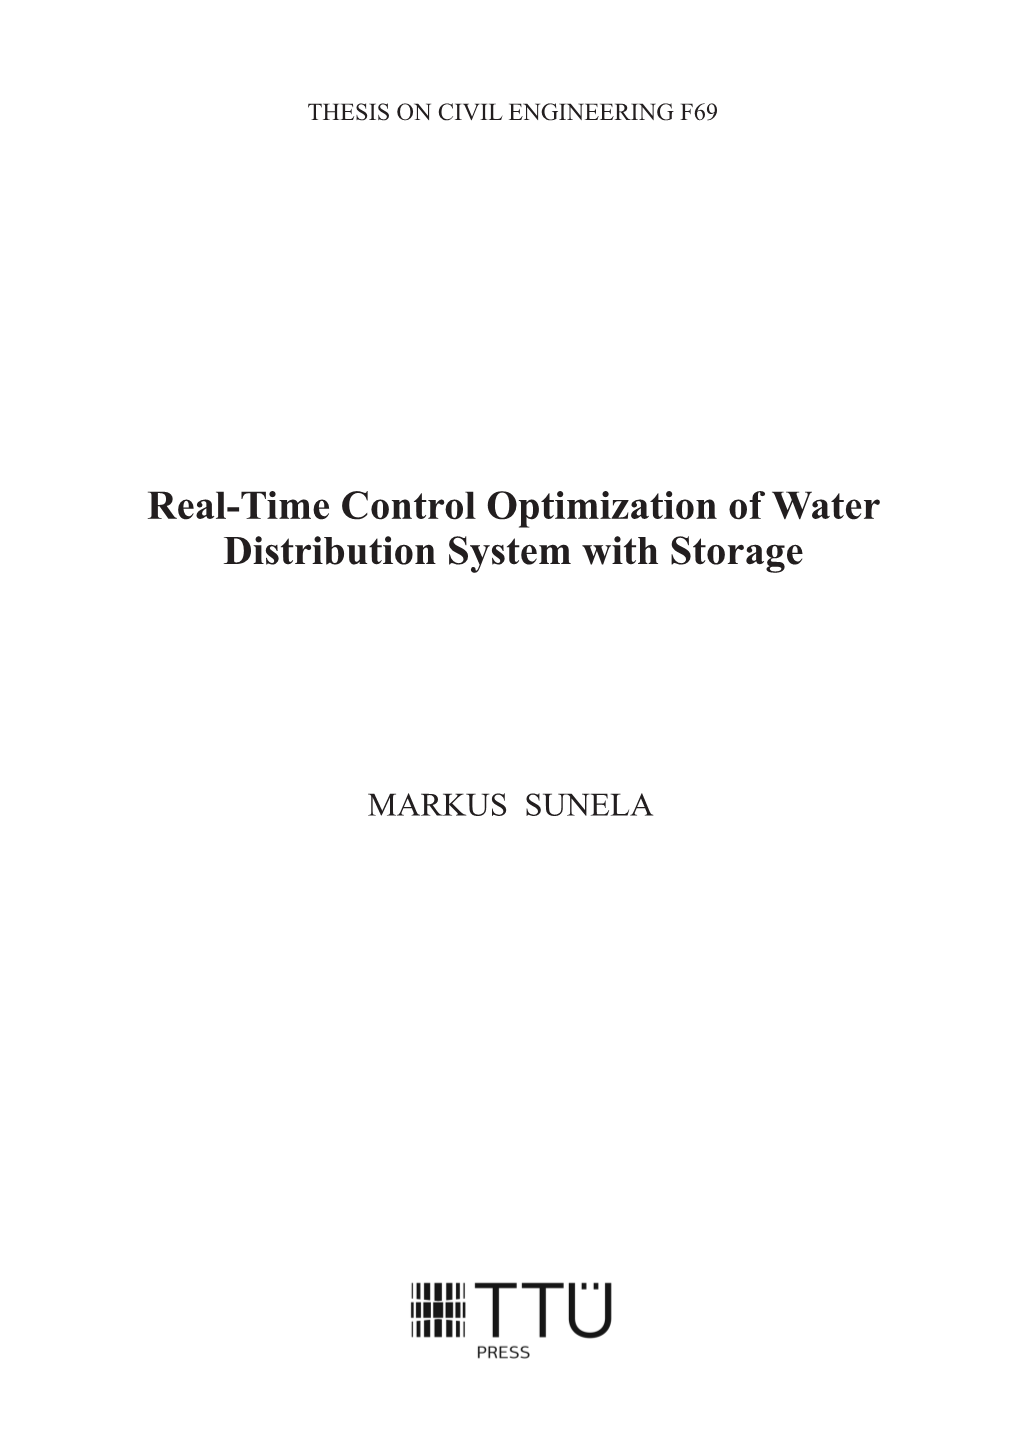 Real-Time Control Optimization of Water Distribution System with Storage